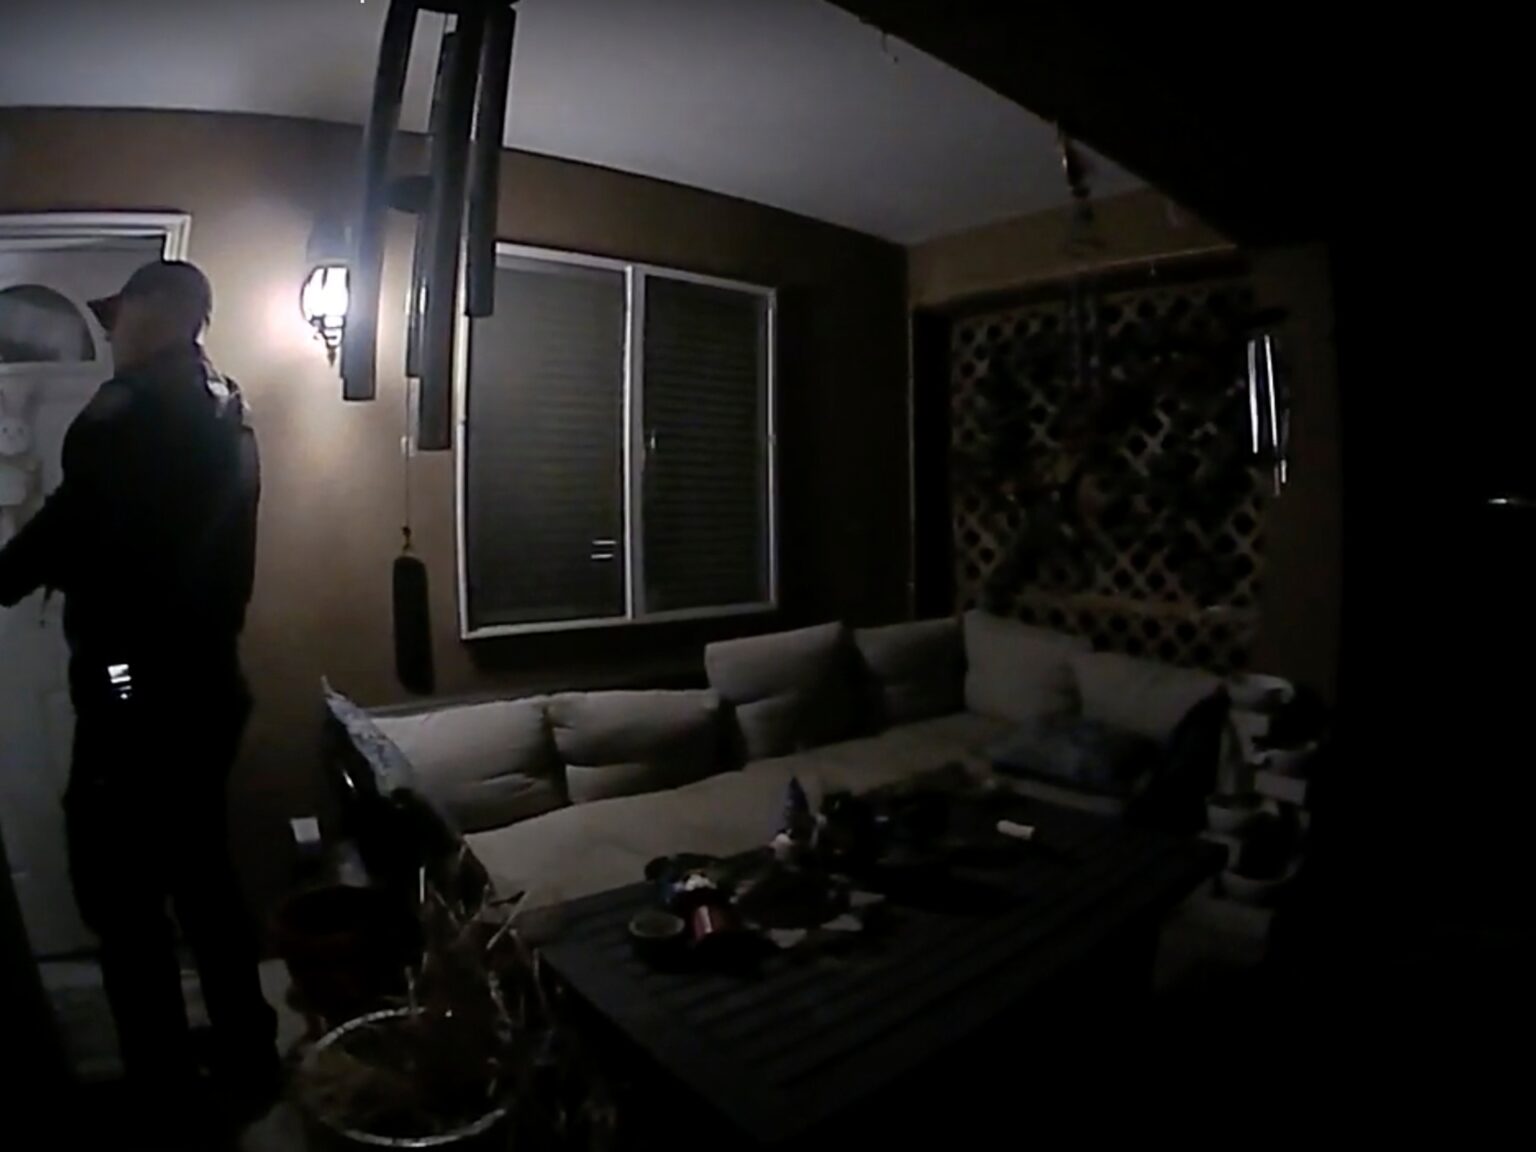 Video shows US police earlier at wrong house